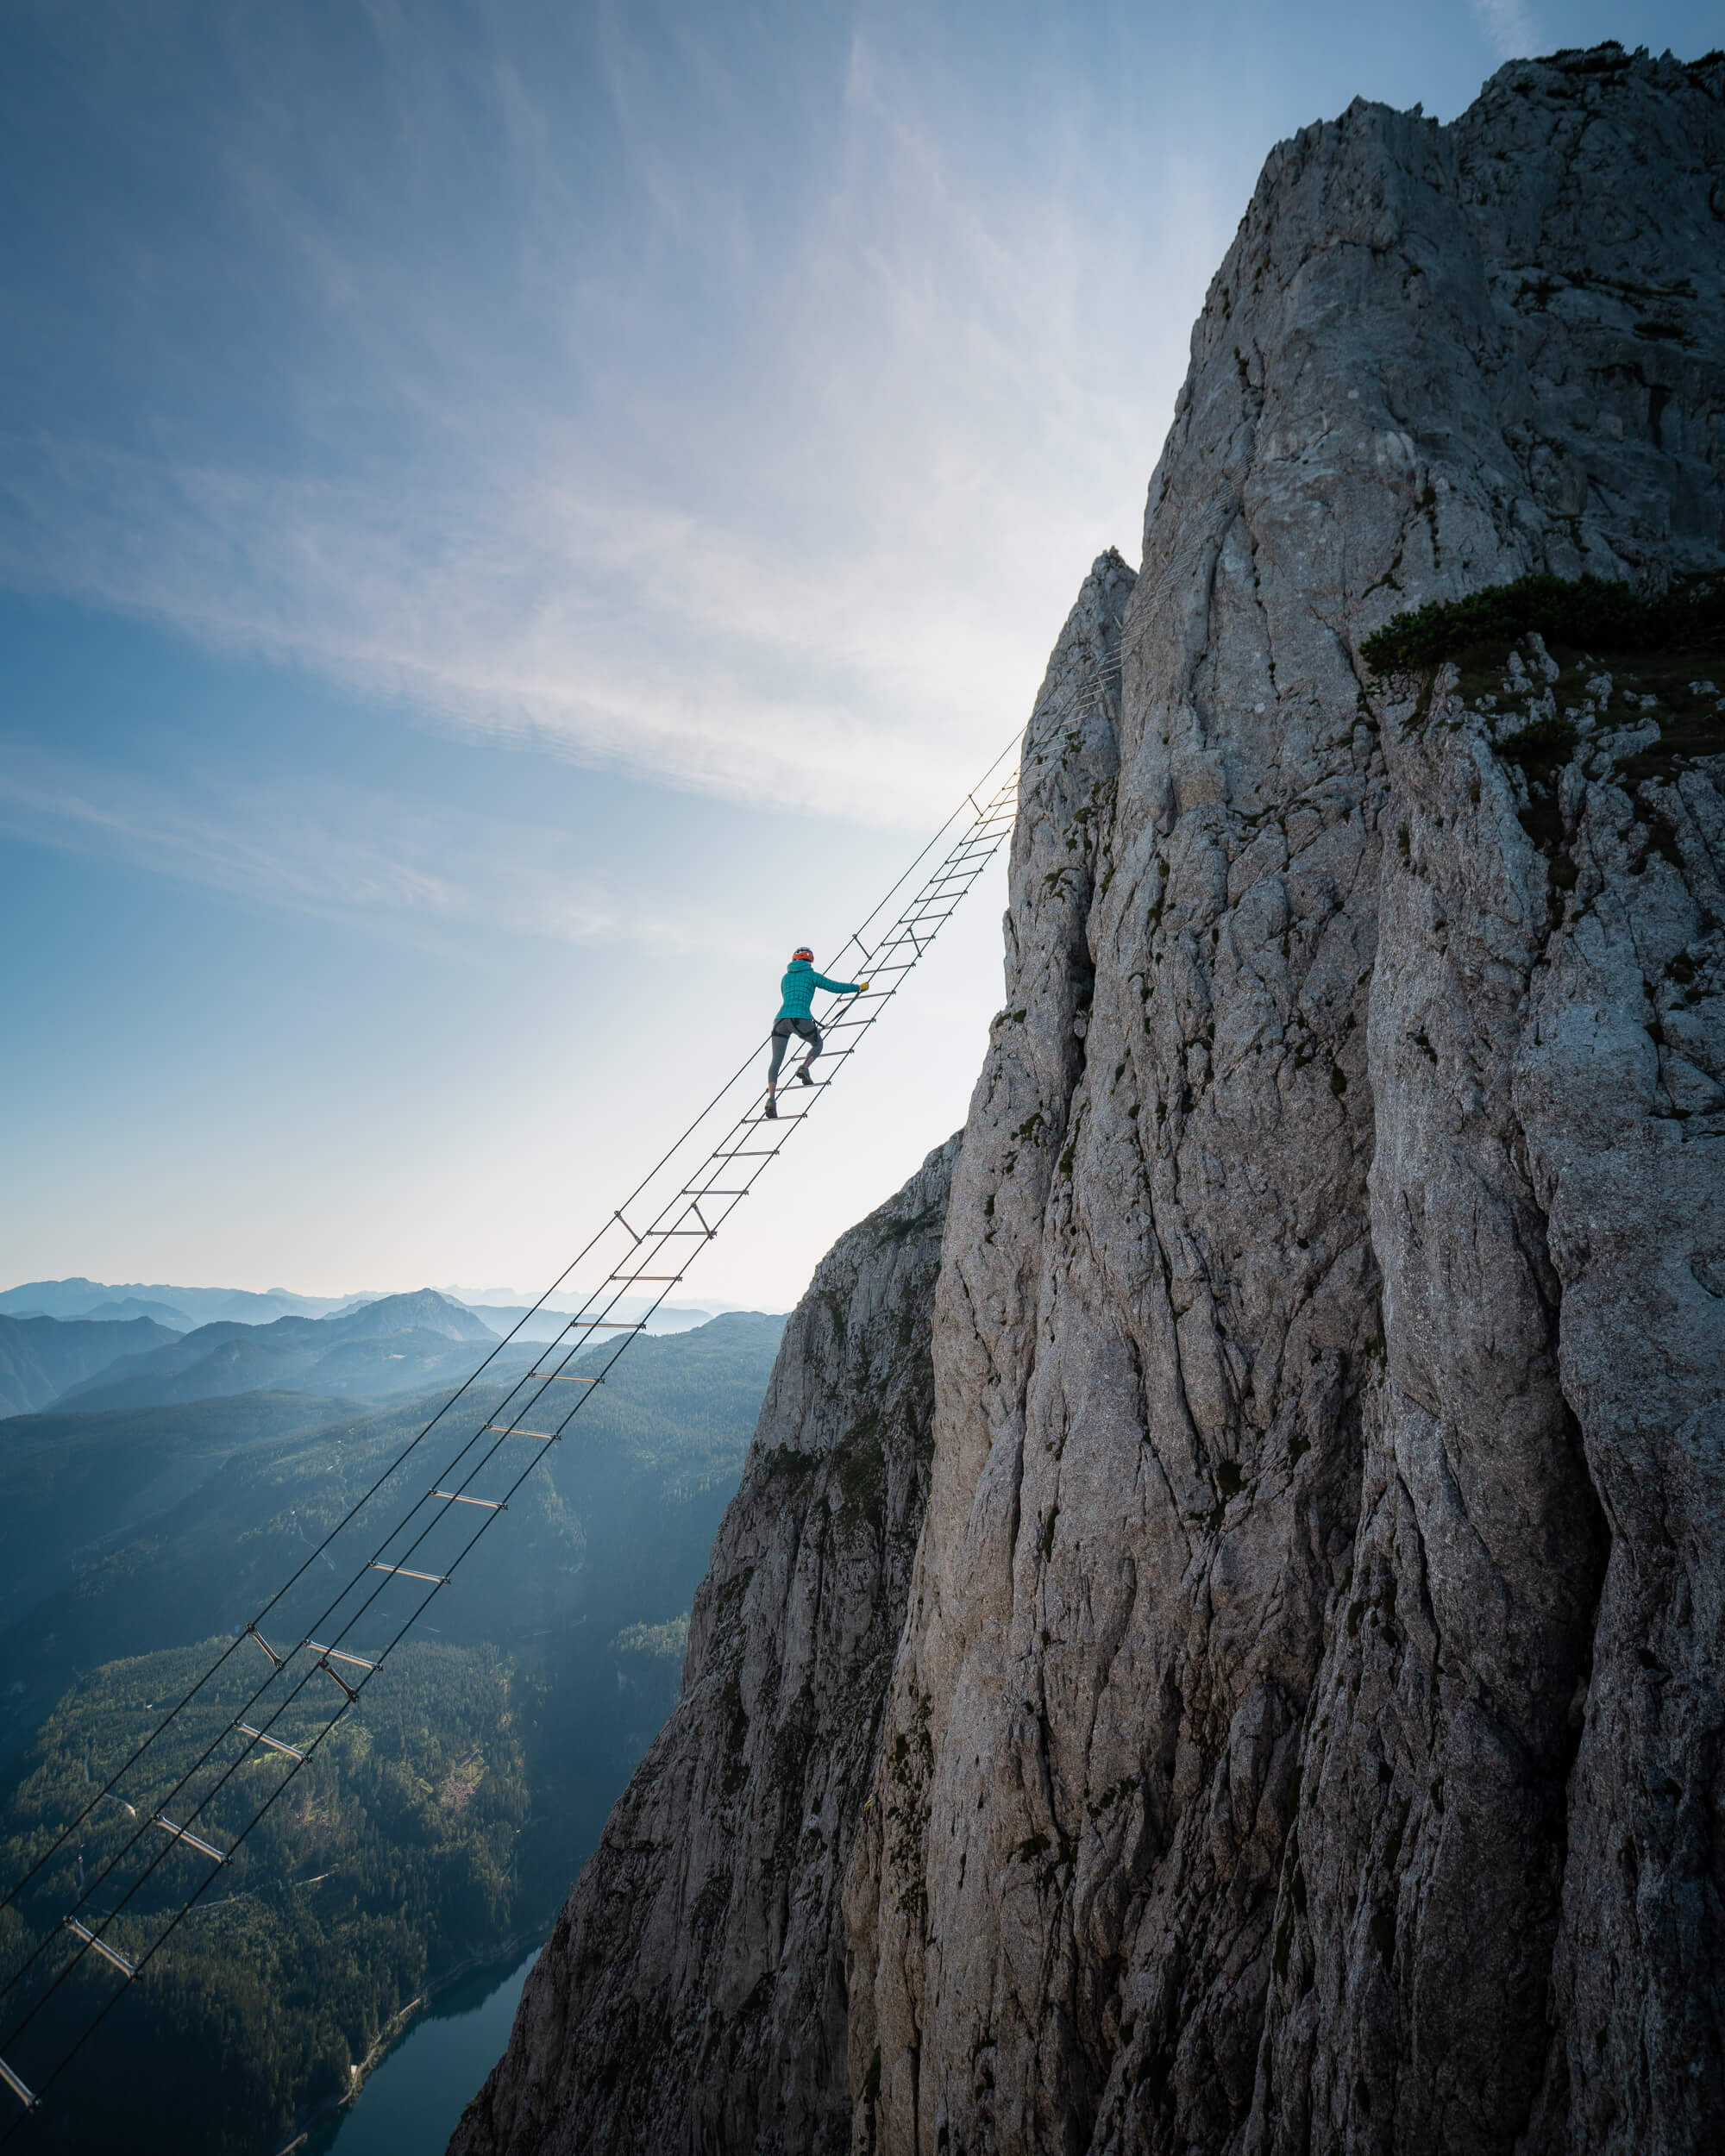 Austrias Ladder To Heaven is the ultimate adrenaline rush!